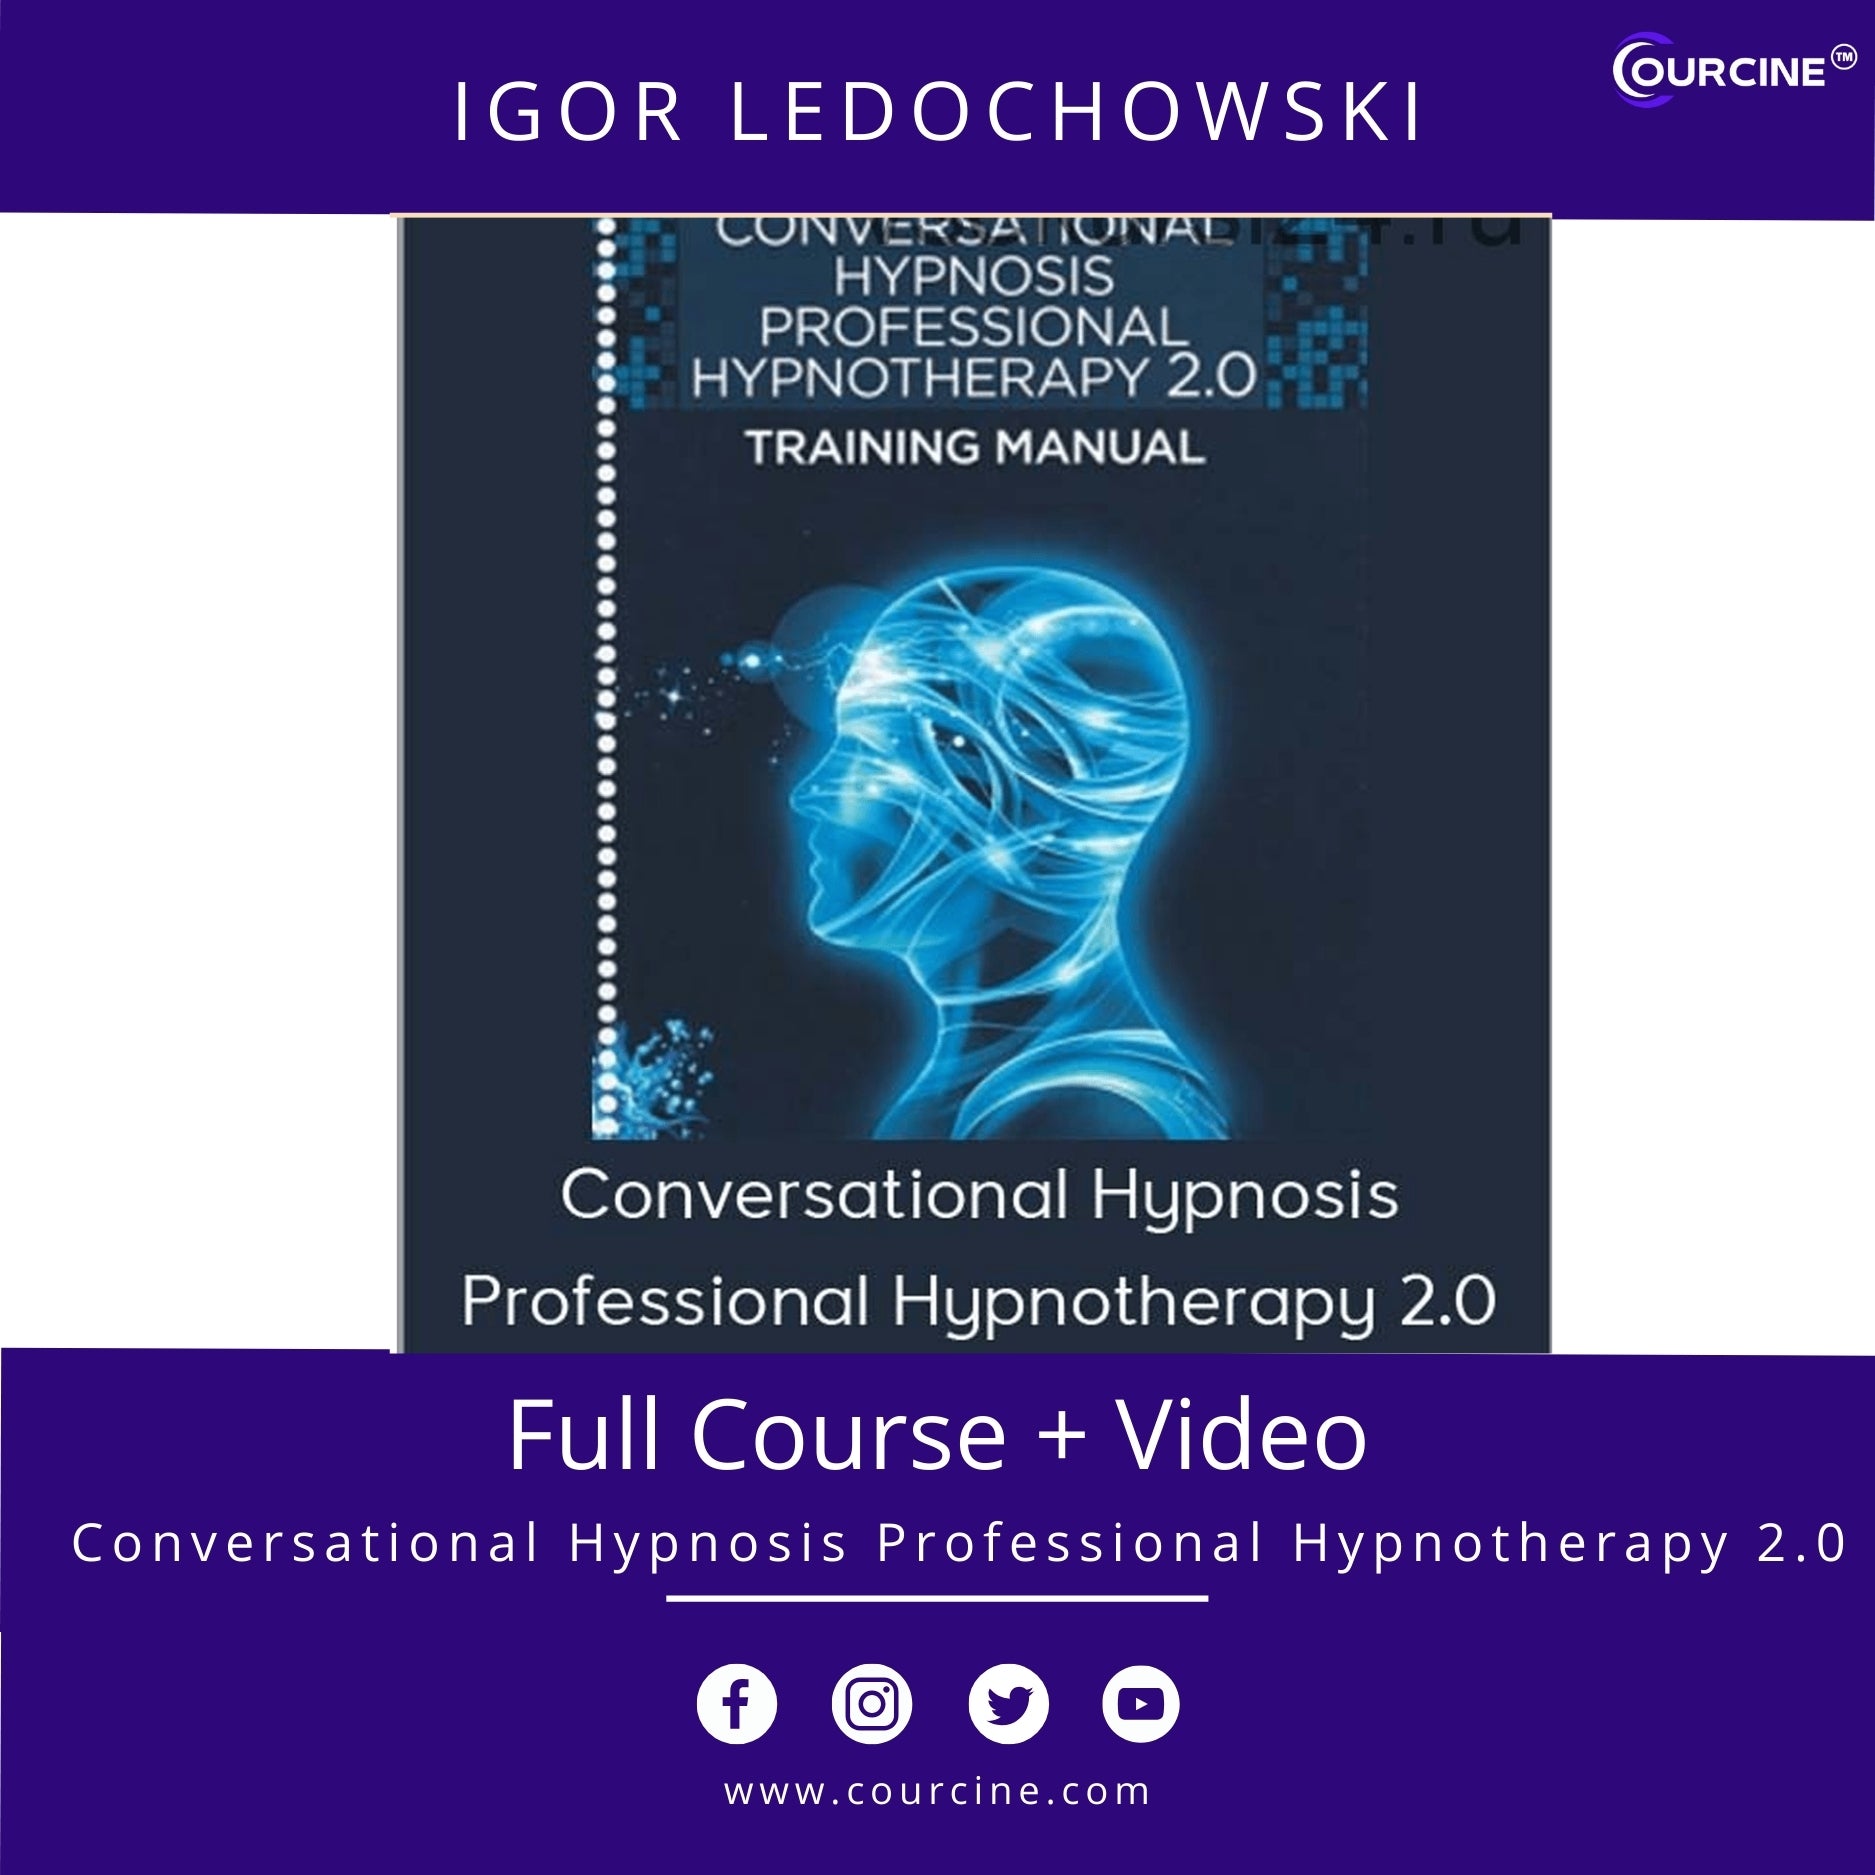 Igor Ledochowski – Conversational Hypnosis Professional Hypnotherapy 2.0 Online Course Drive link